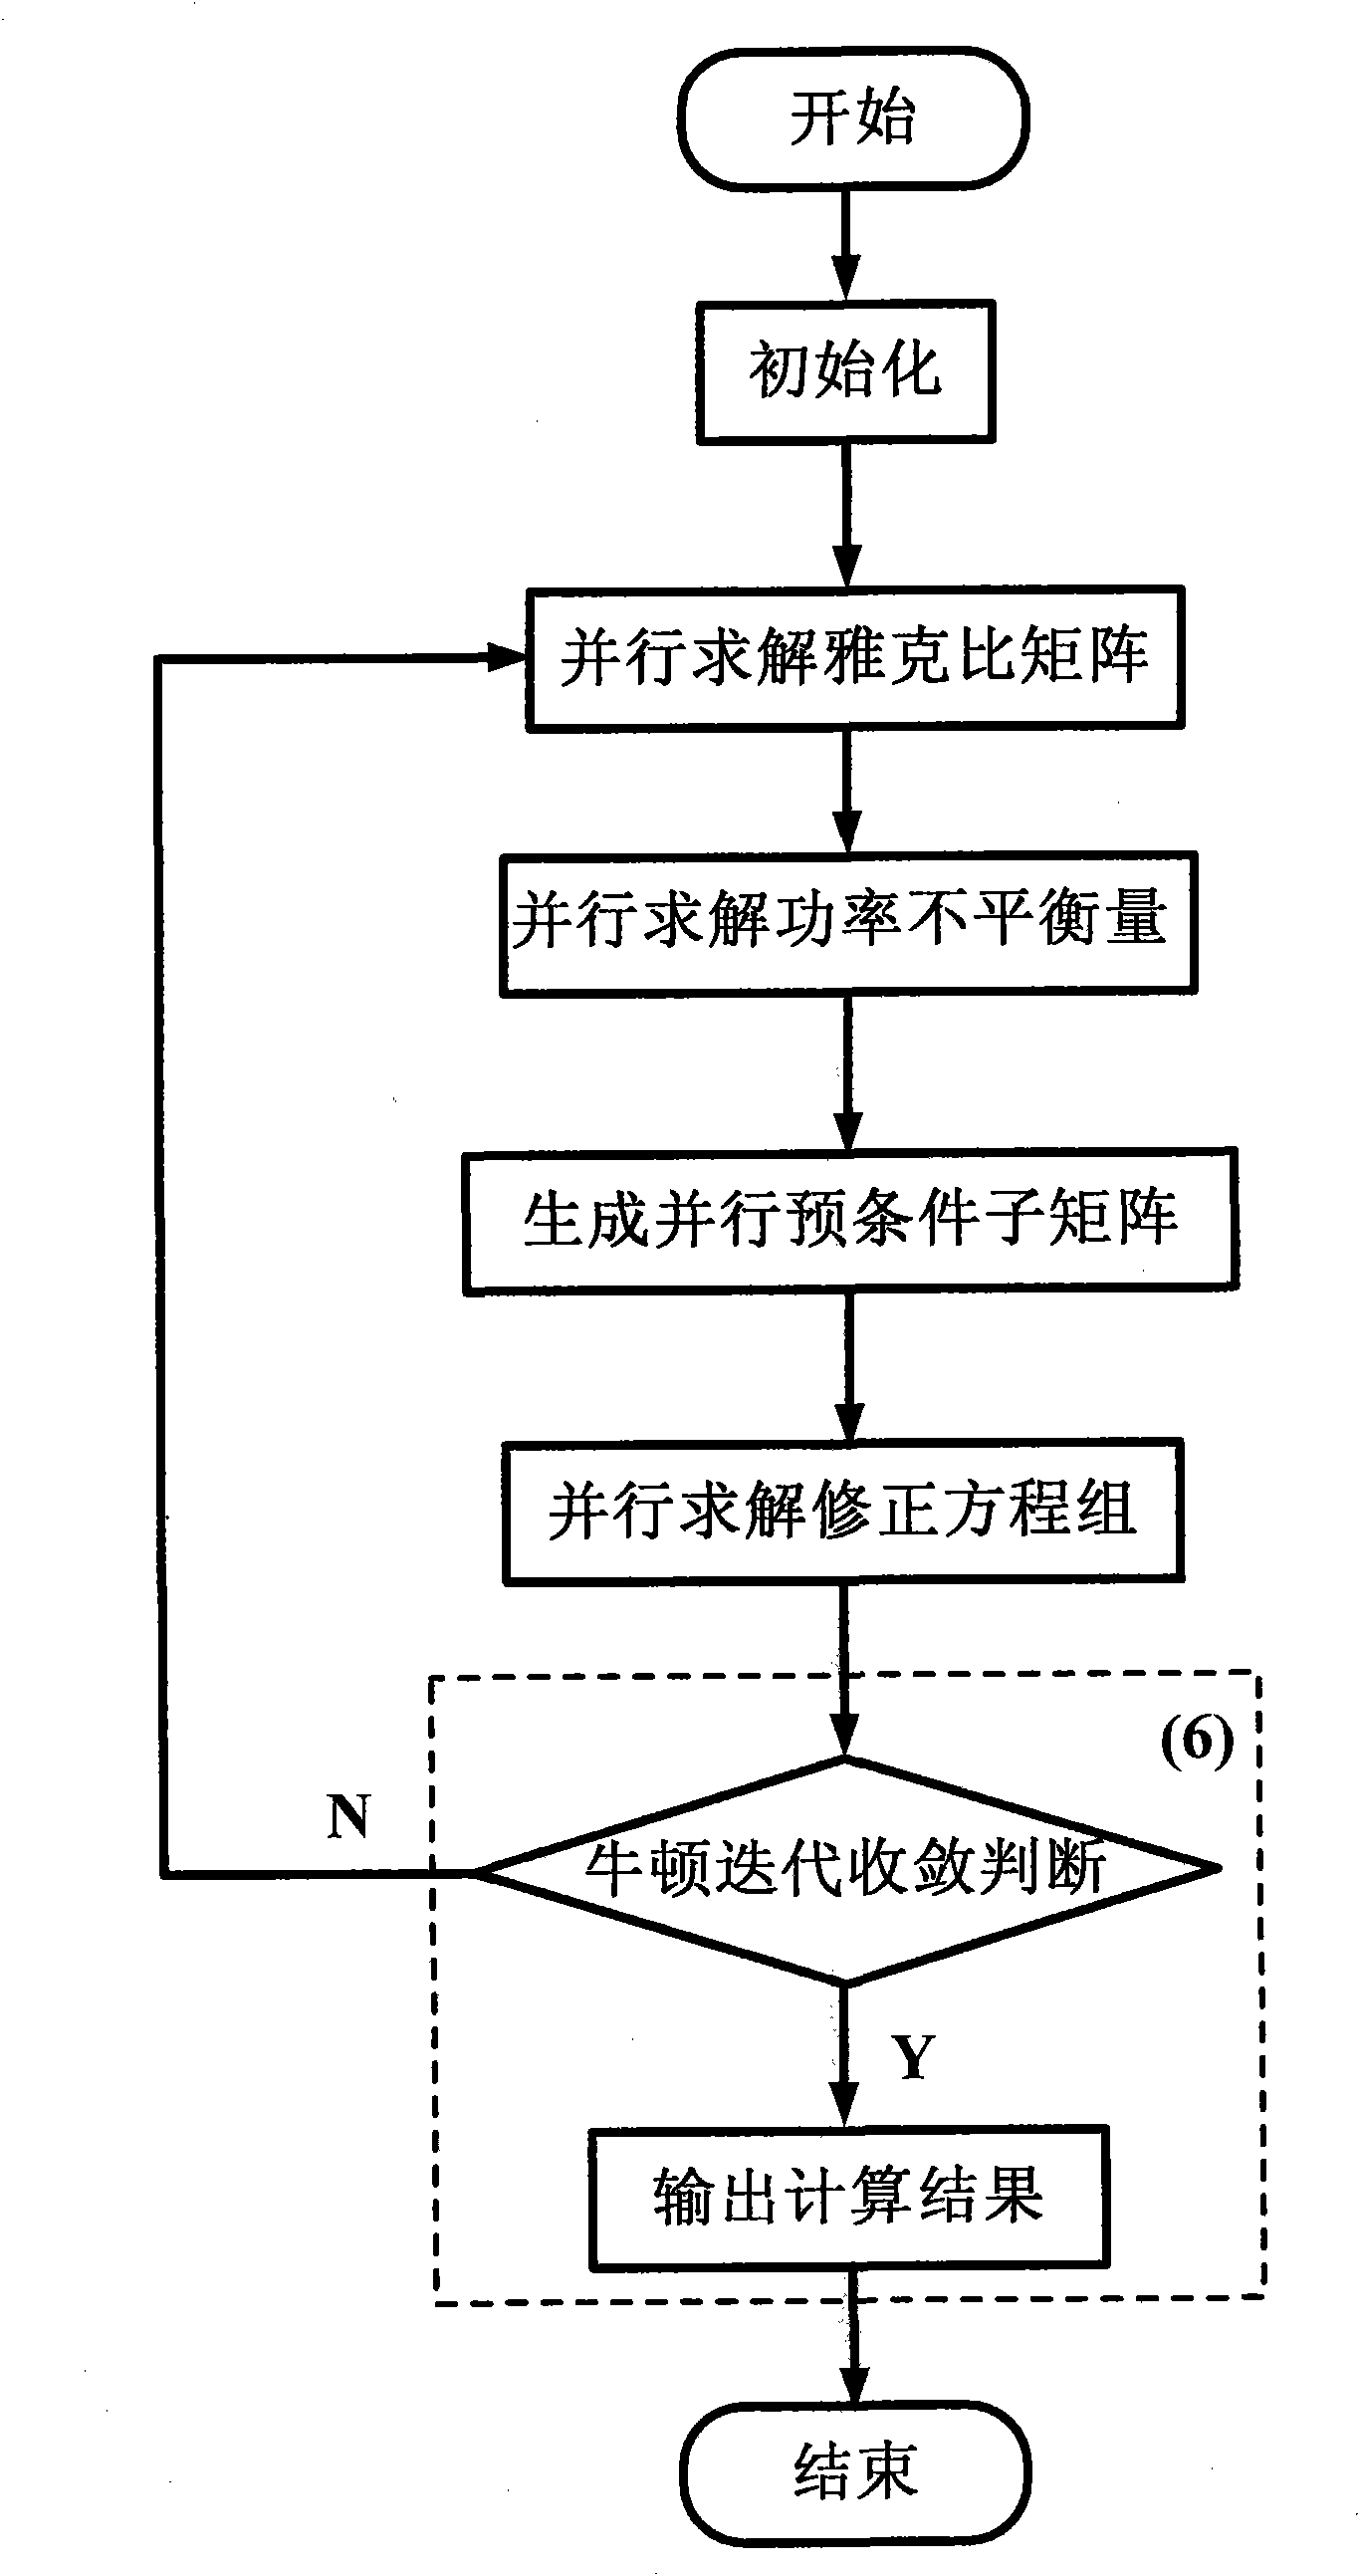 Parallel computation method for Newton power flow of large-scale electric power system